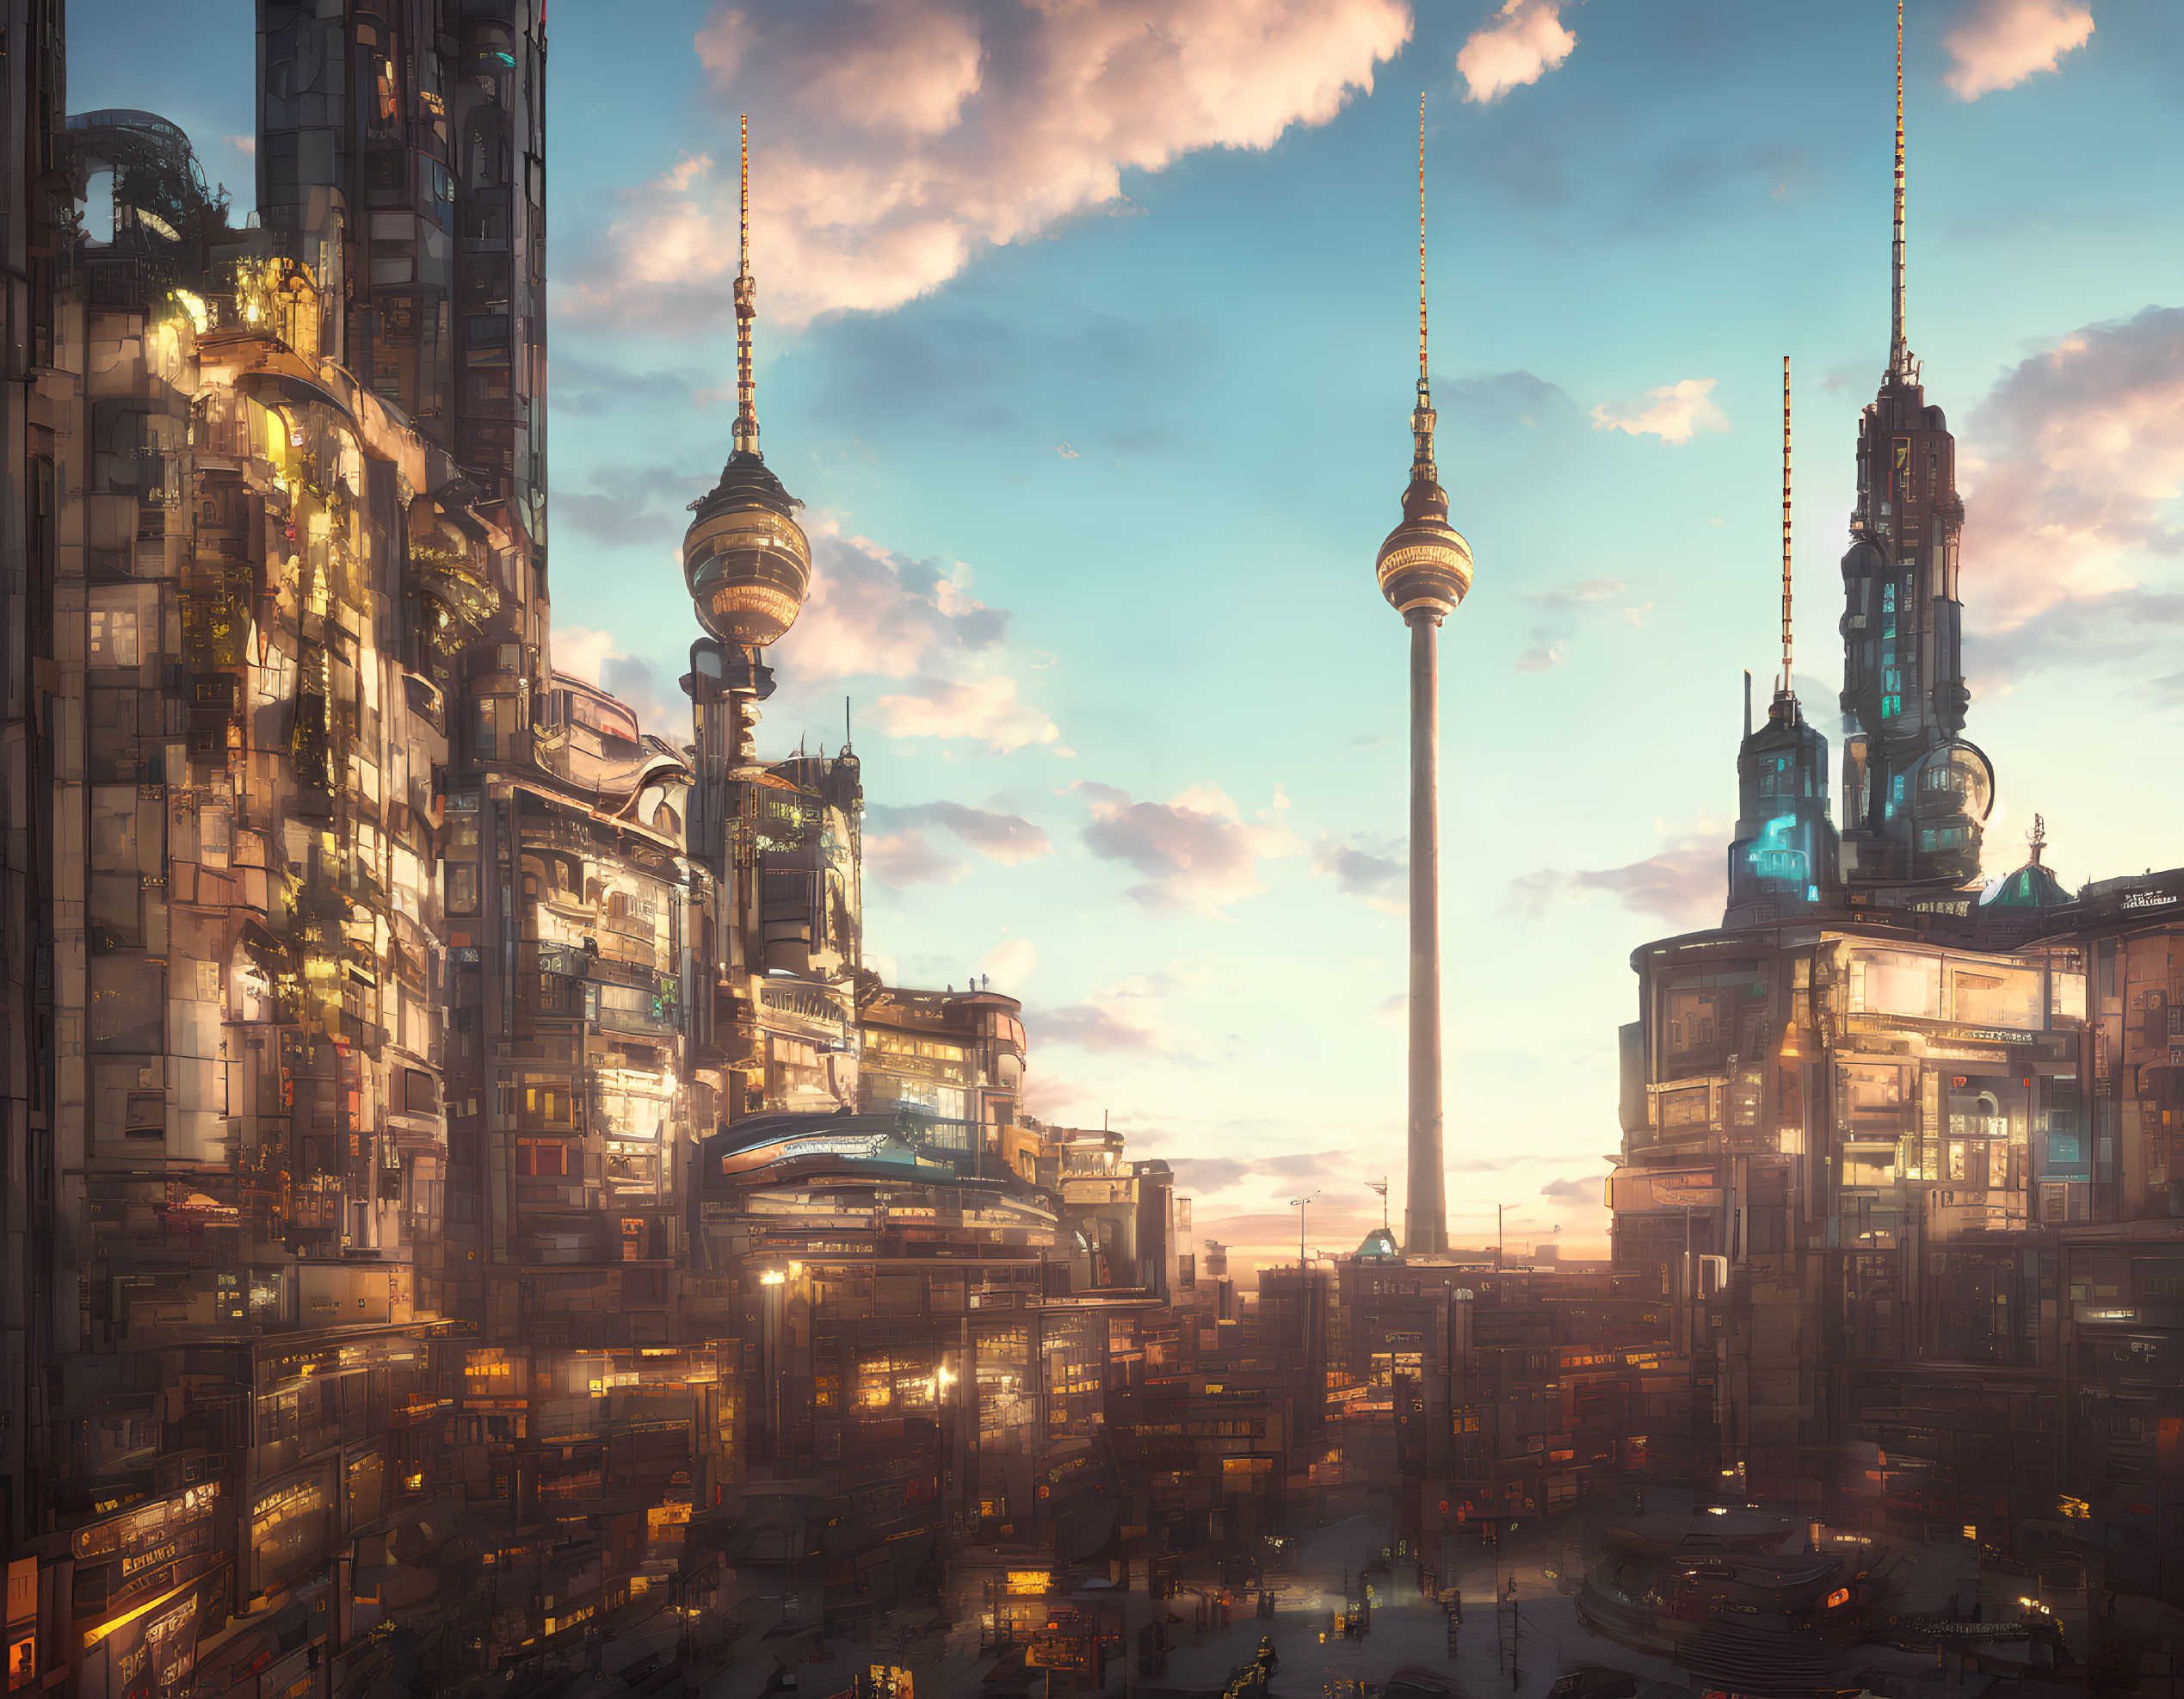 Futuristic cityscape at sunset with glowing skyscrapers & prominent spire